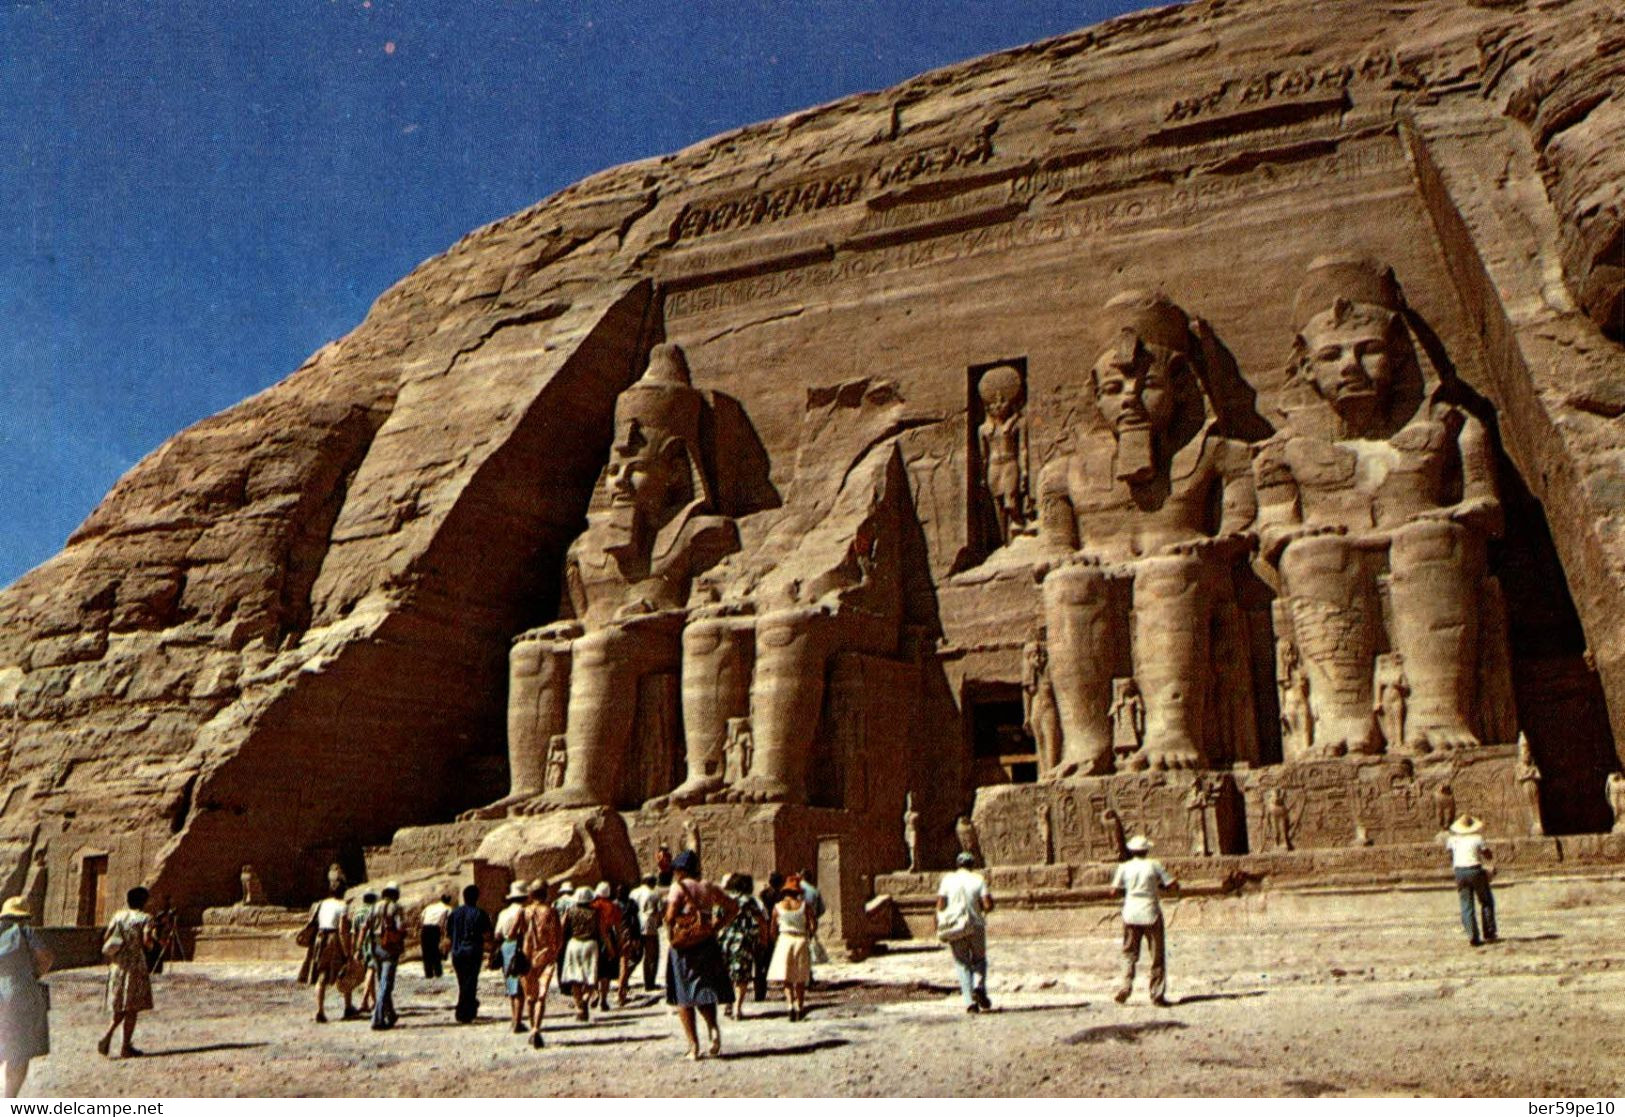 EGYPTE ABU SIMBEL GENERAL VIEWW OF THE TEMPLE ABU SIMBEL - Temples D'Abou Simbel